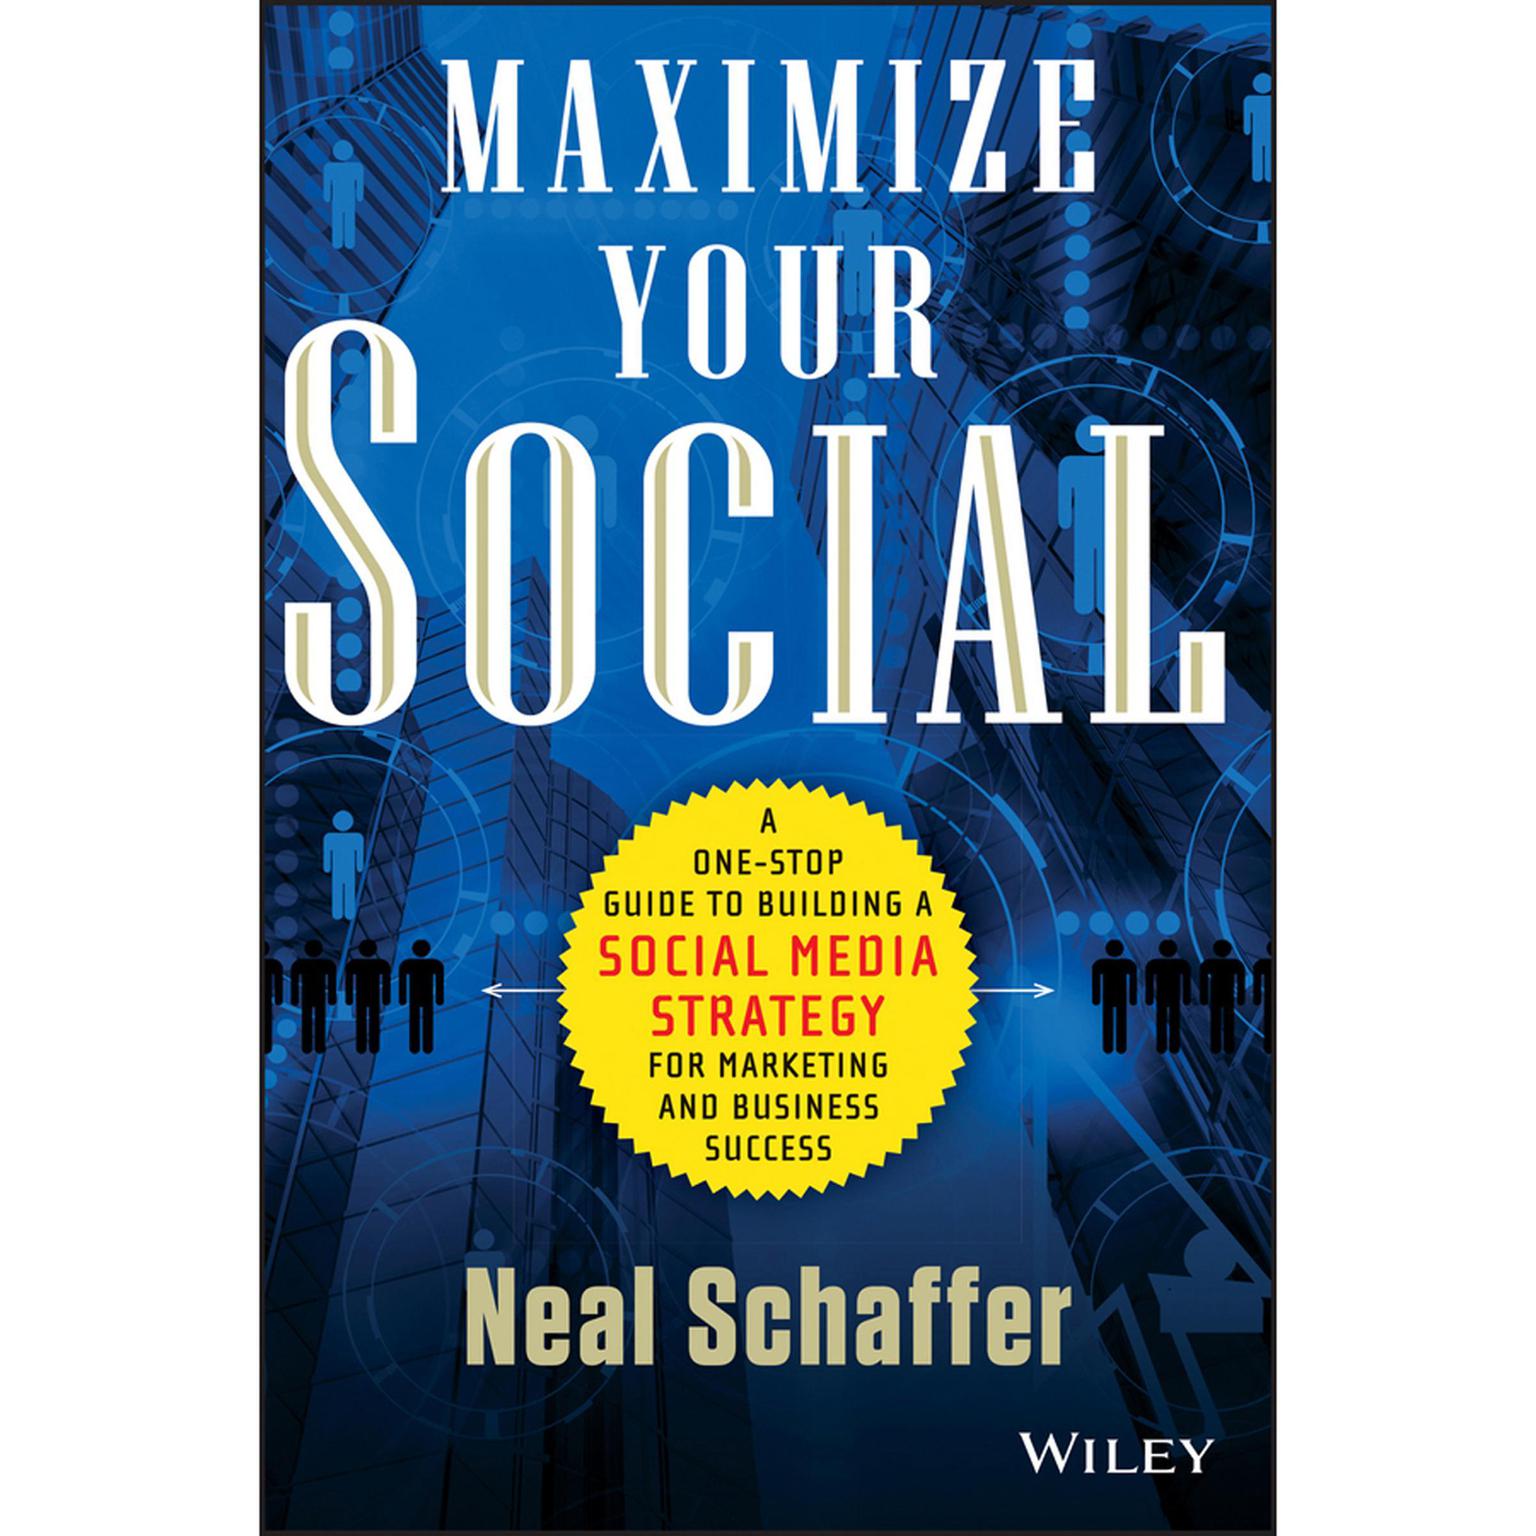 Maximize Your Social: A One-Stop Guide to Building a Social Media Strategy for Marketing and Business Success Audiobook, by Neal Schaffer